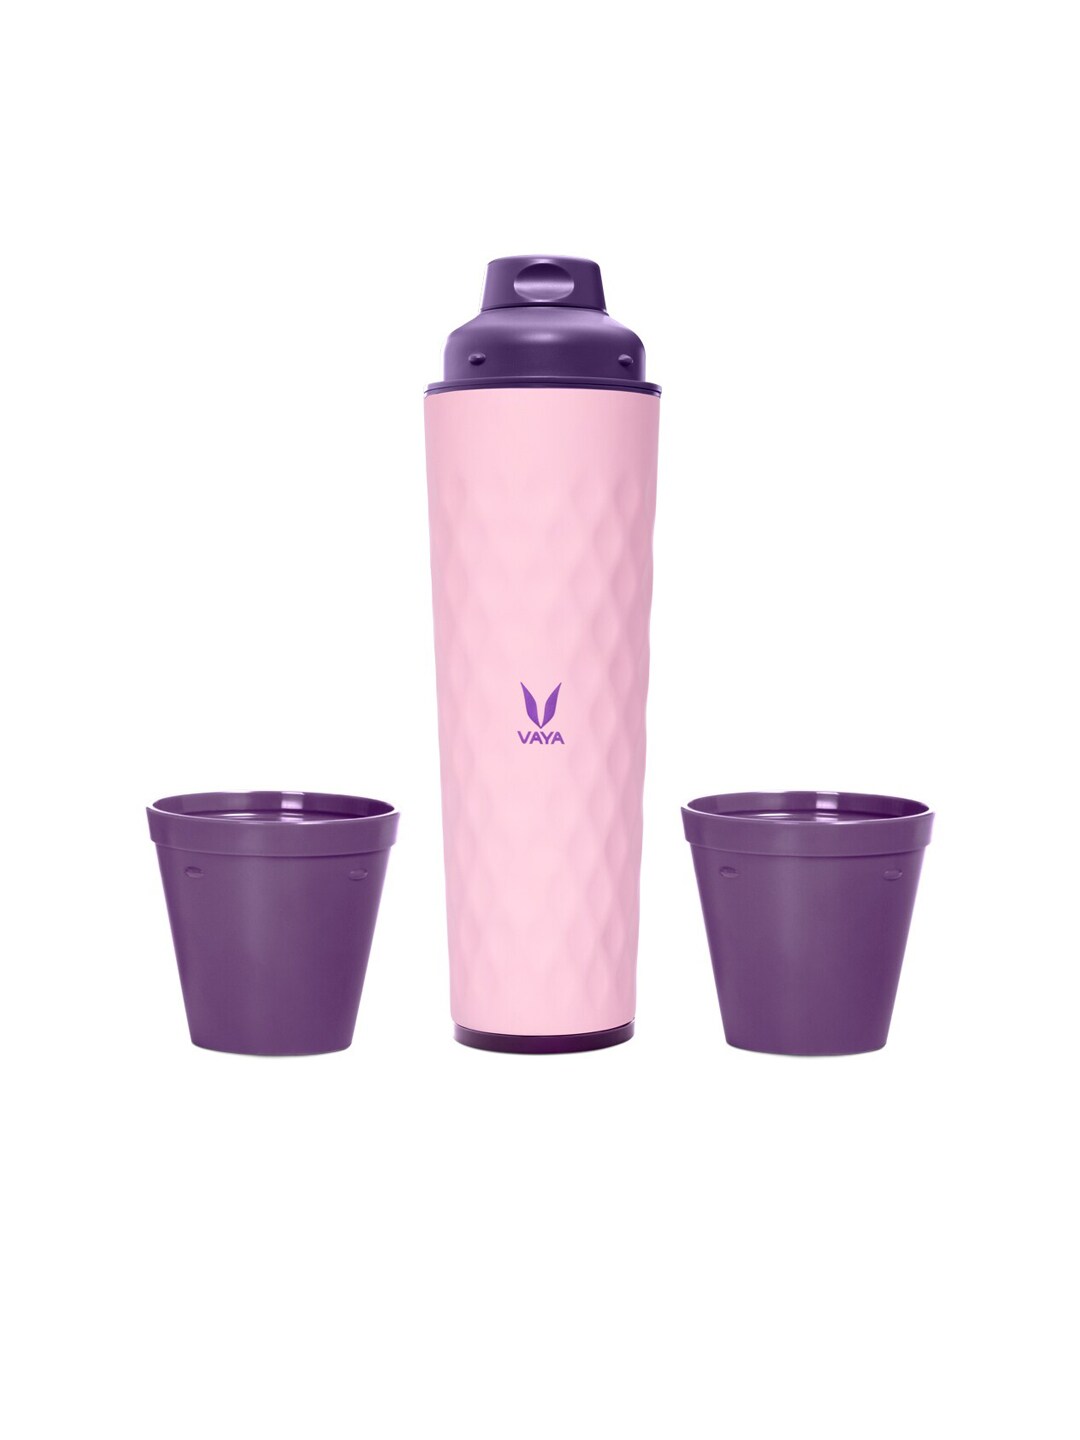 Vaya Pink Solid Stainless Steel Water Bottle Price in India